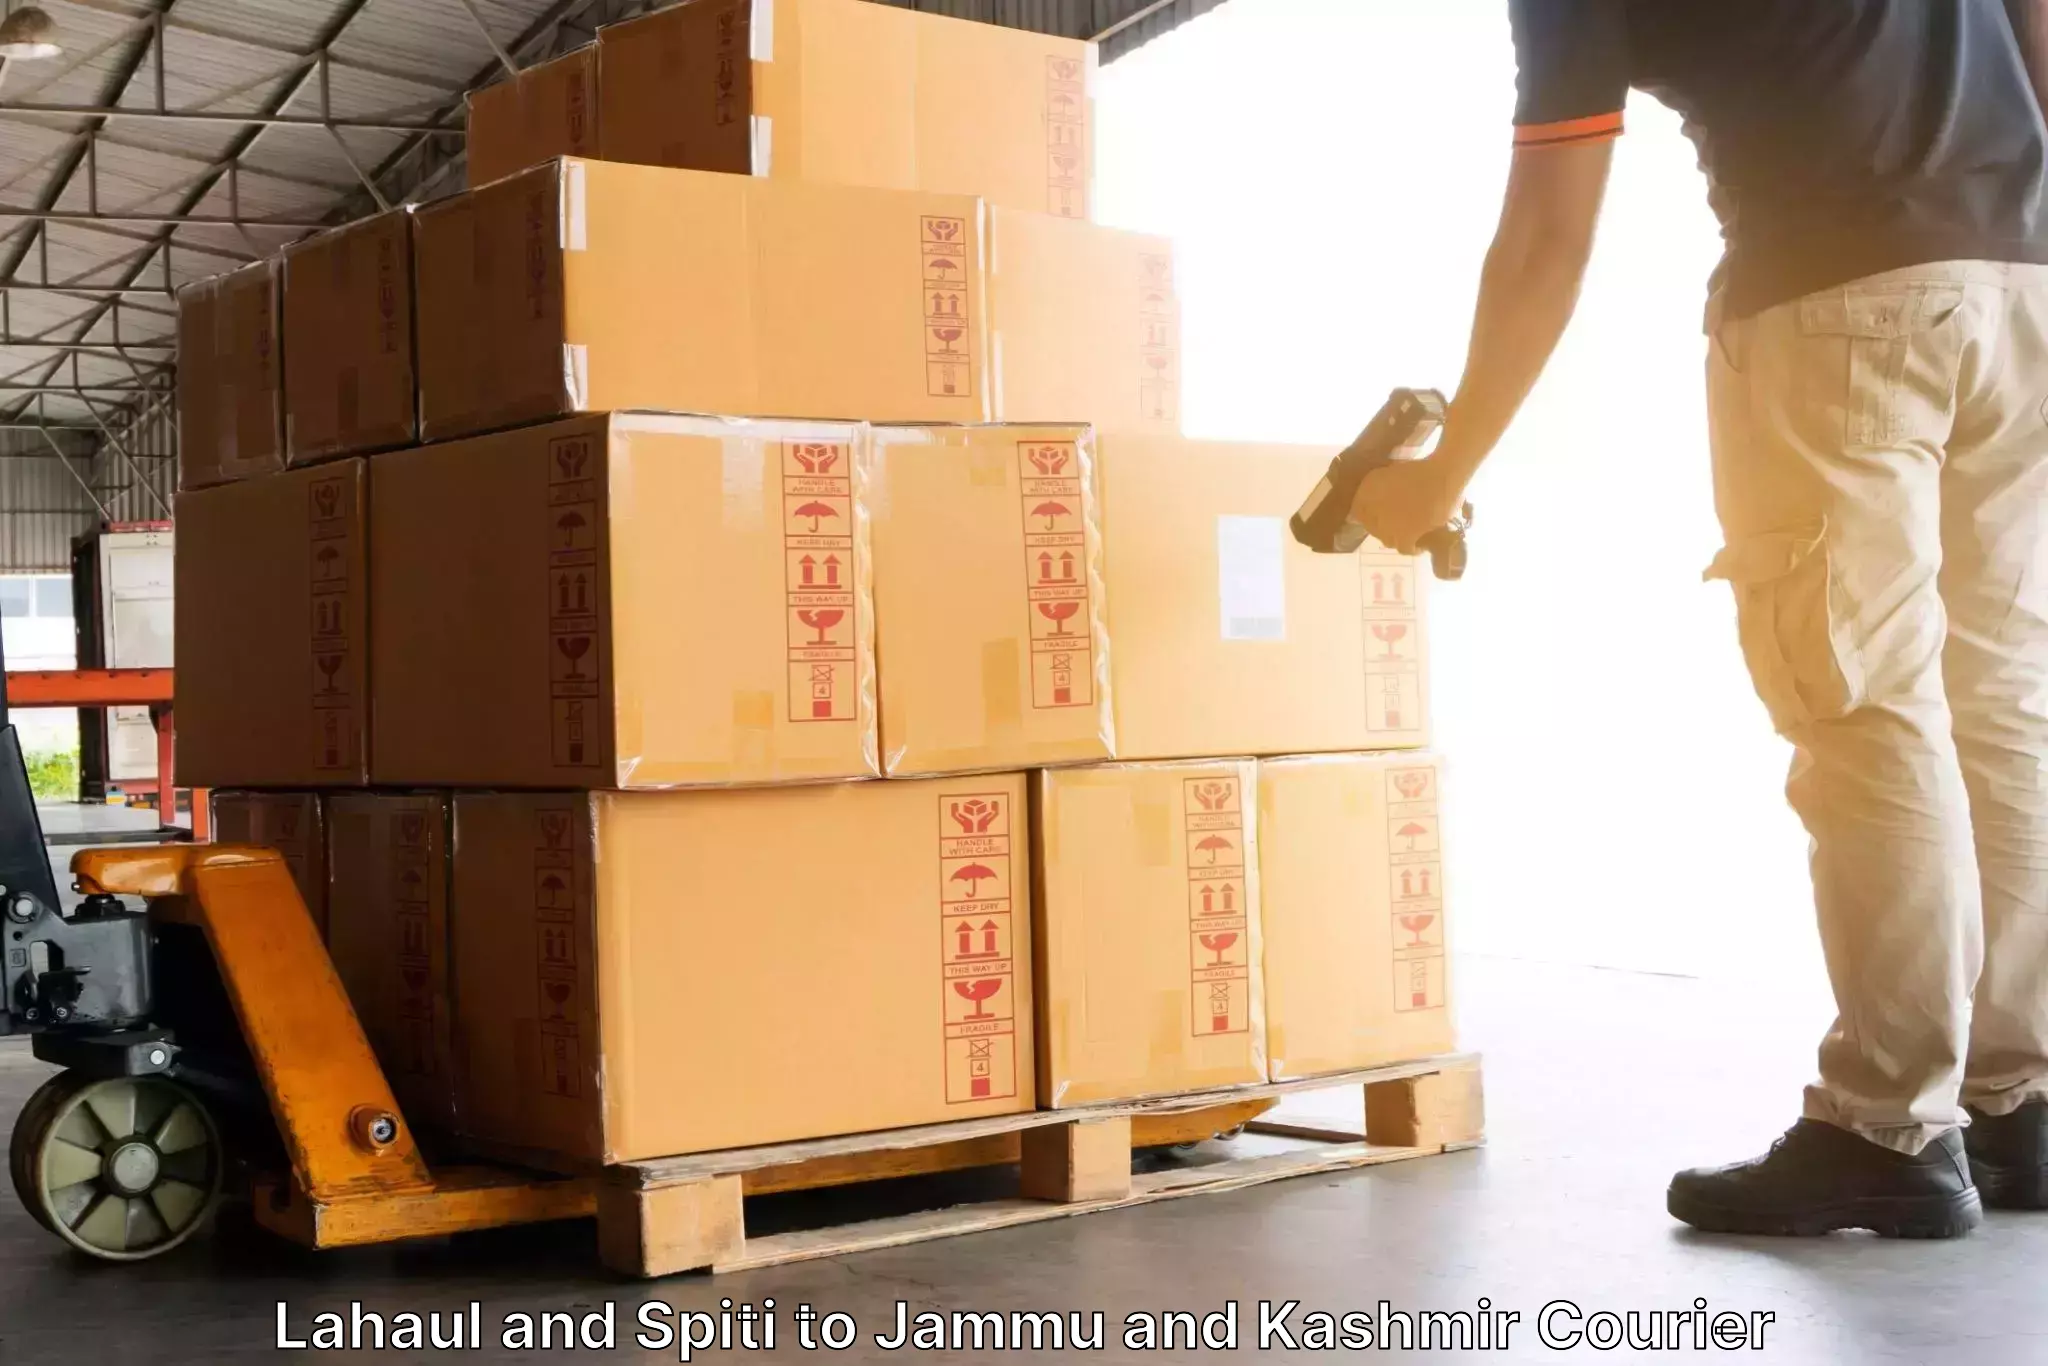 Courier service efficiency Lahaul and Spiti to IIT Jammu